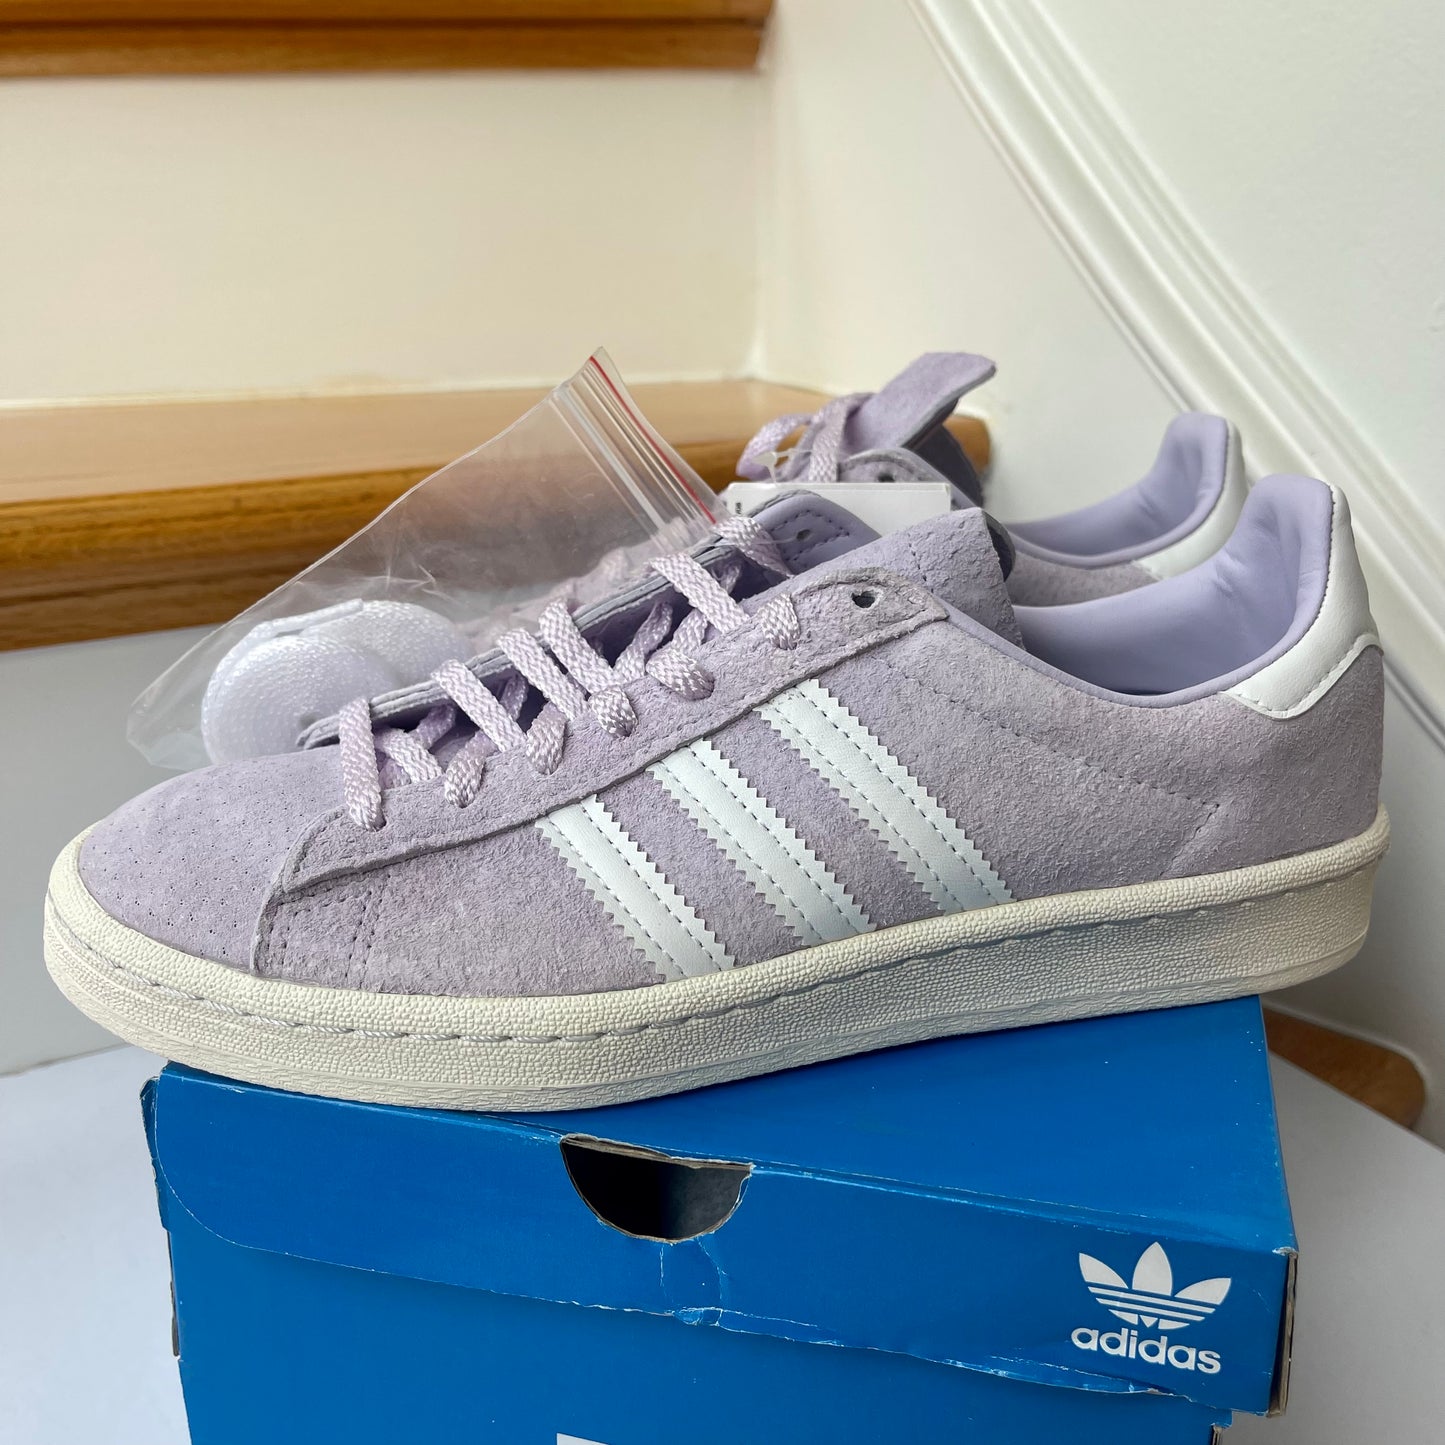 Adidas Campus 80s Light Purple Sneakers leather , lavender